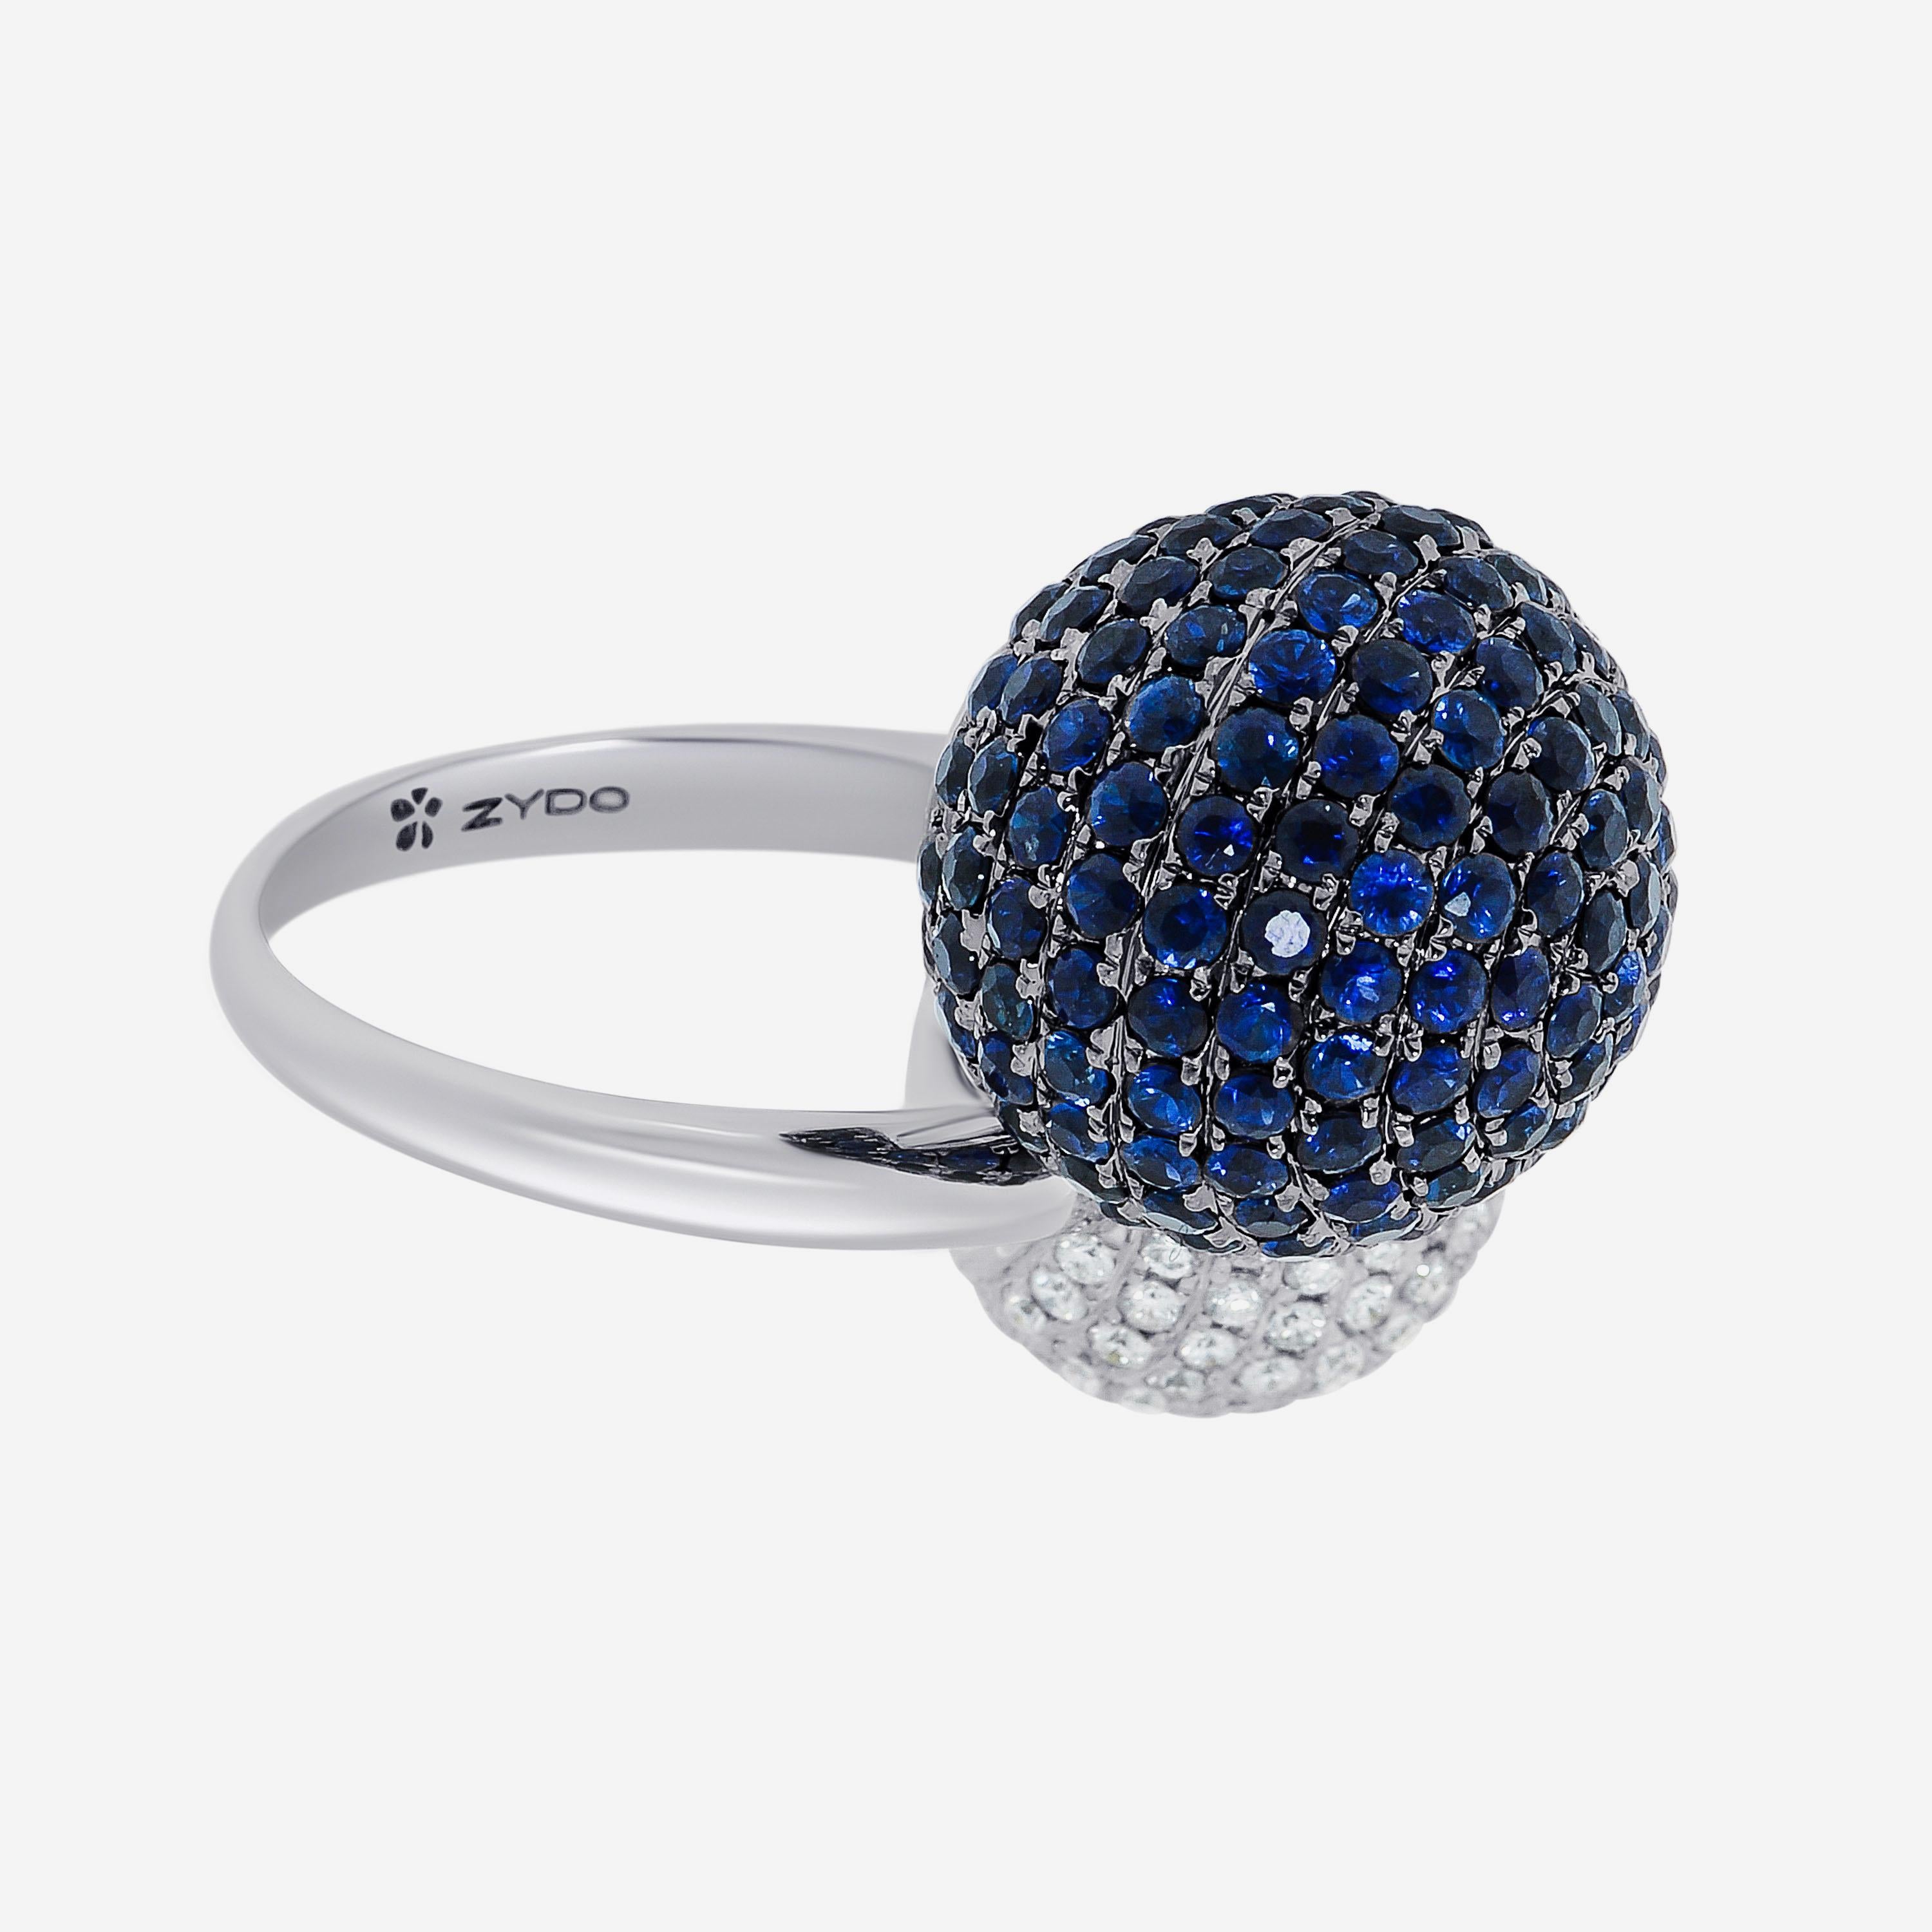 Contemporary Zydo 18K White Gold, Sapphire & Diamond Statement Ring sz. 6.5 For Sale